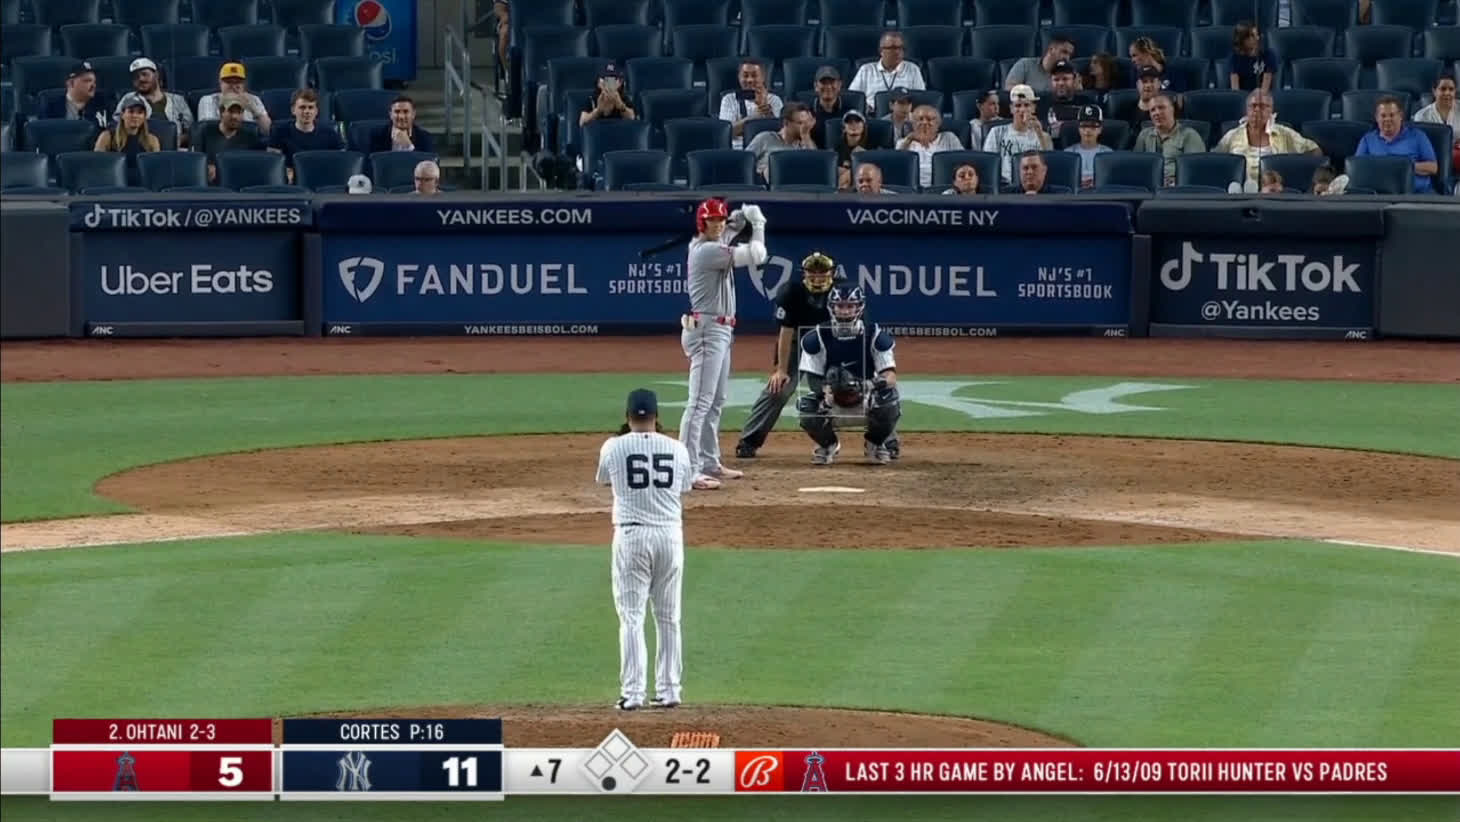 Yankee fans fell in love with Nestor Cortes Jr. this season